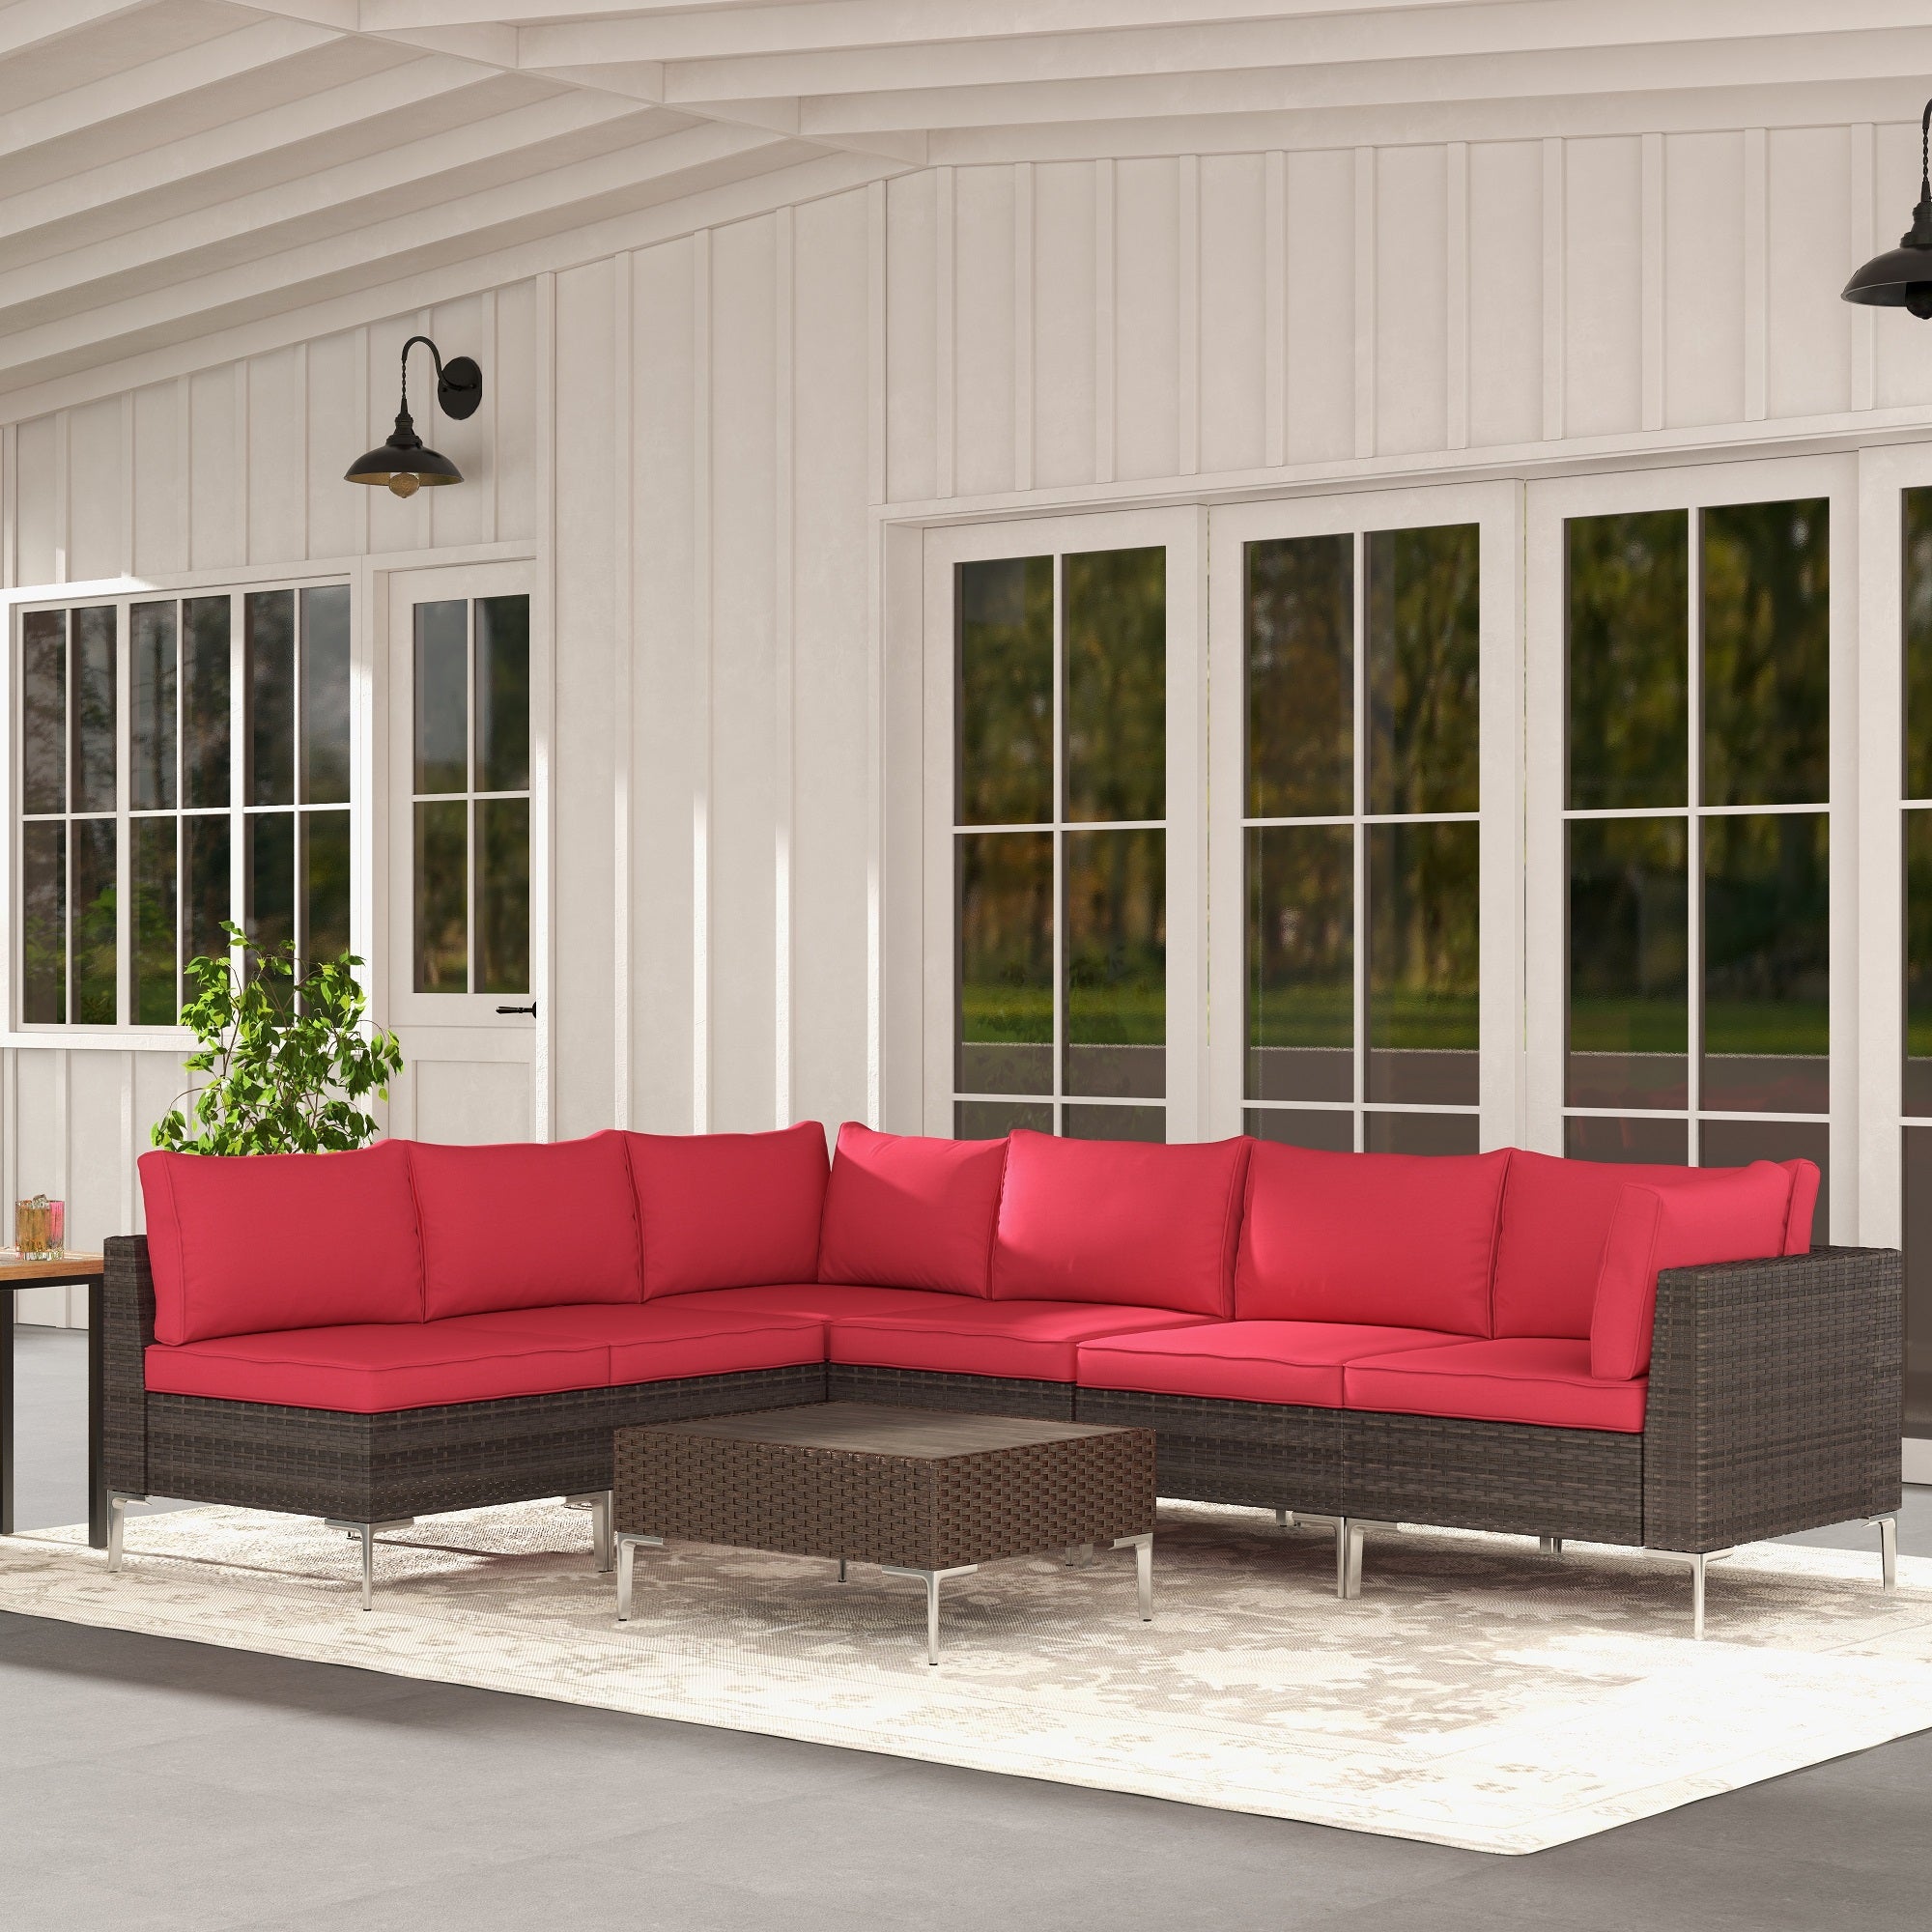 7pieces-outdoor-sectional-sofa-wicker-furniture